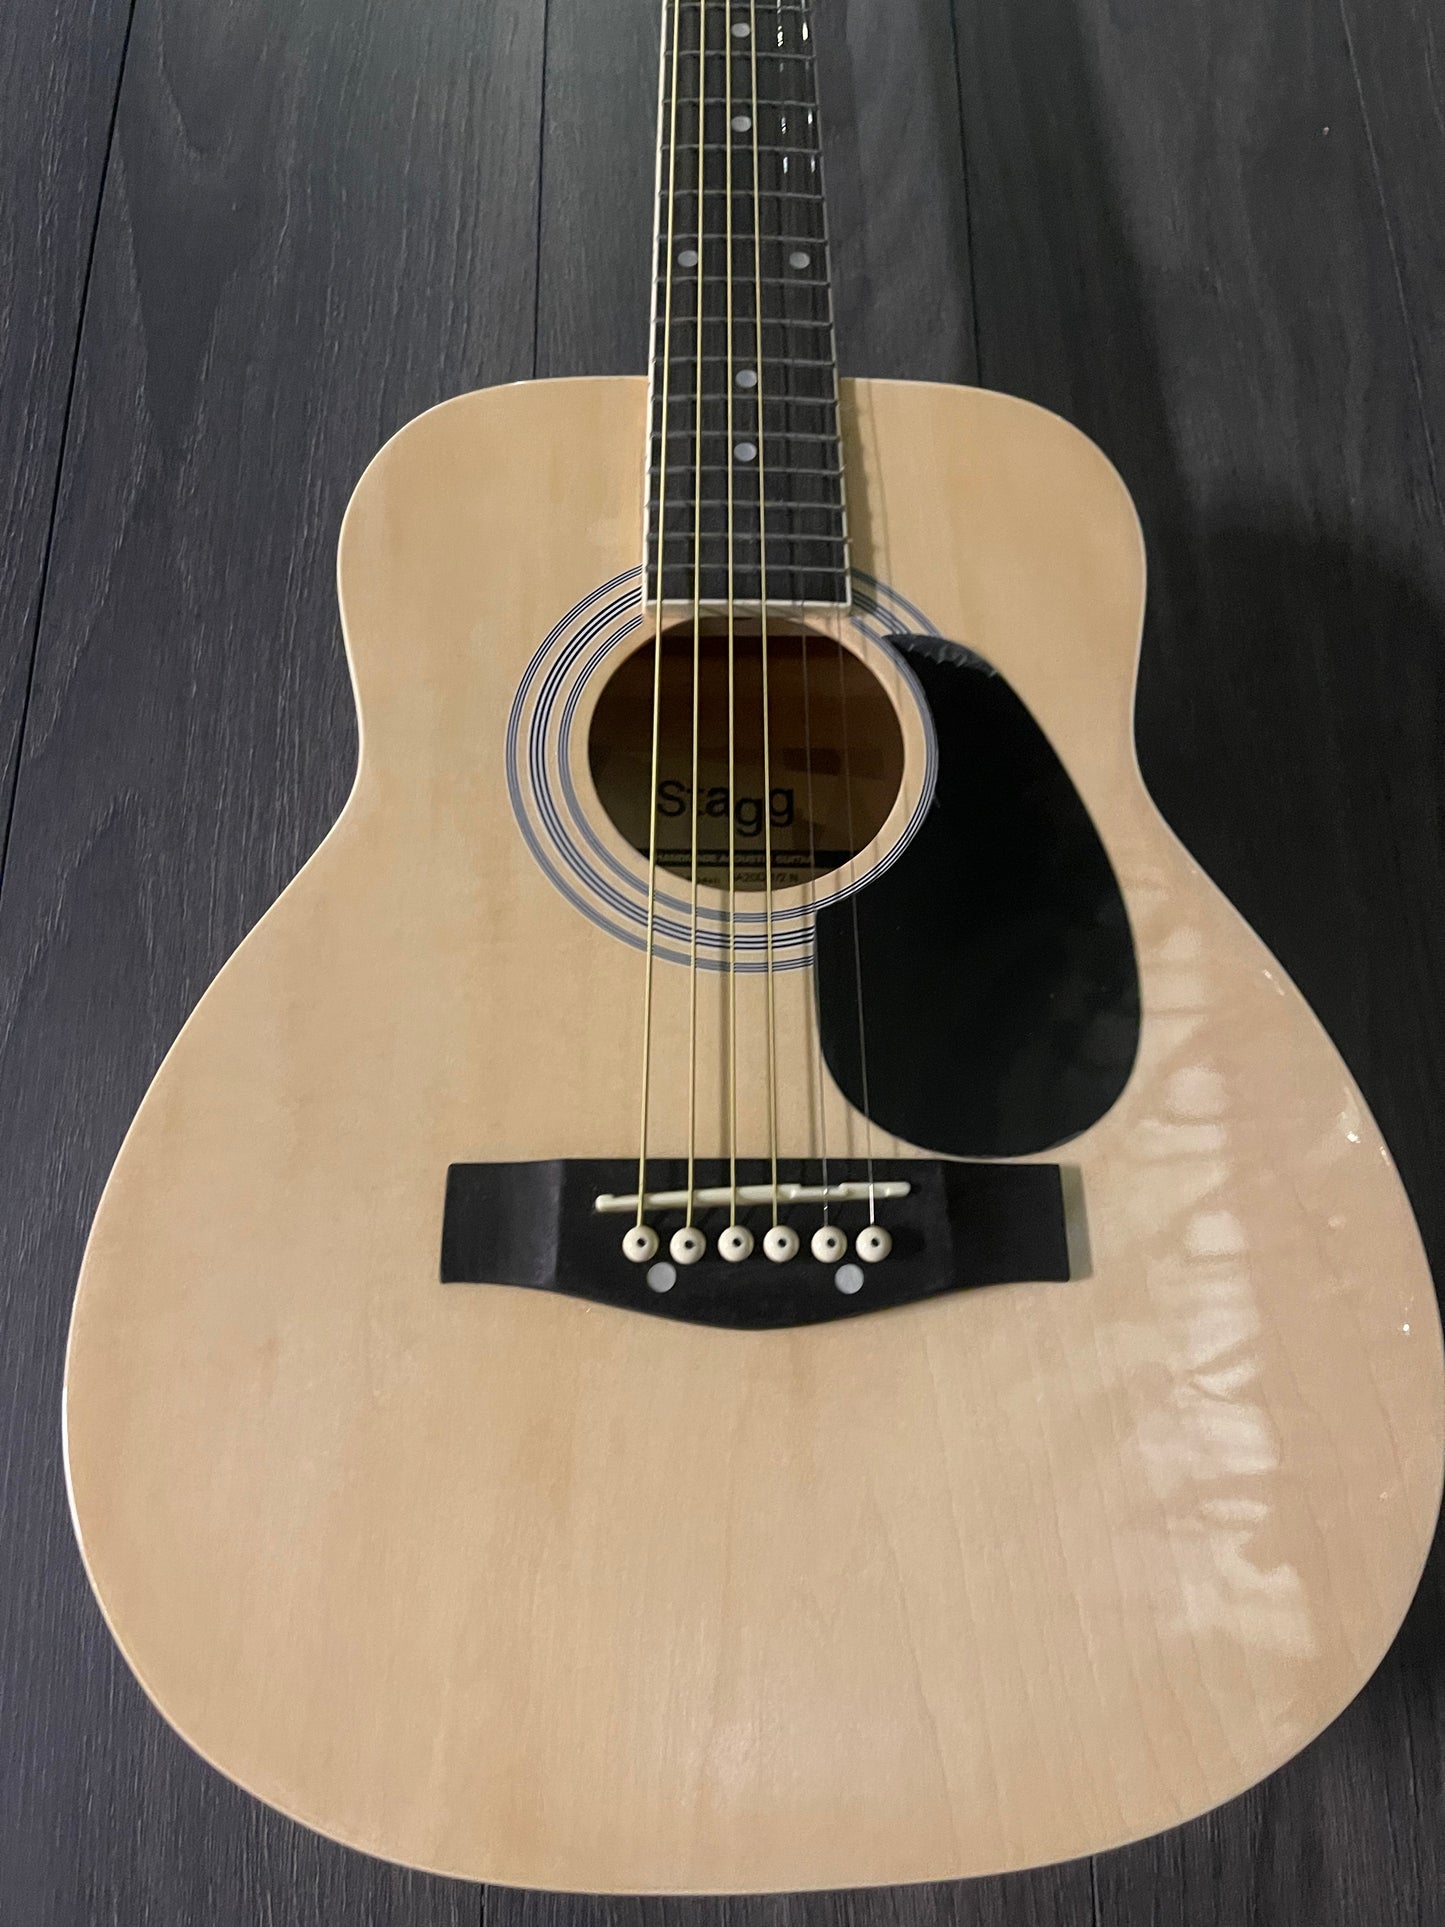 Stagg SA20D 1/2 N 1/2 natural dreadnought acoustic guitar with basswood top